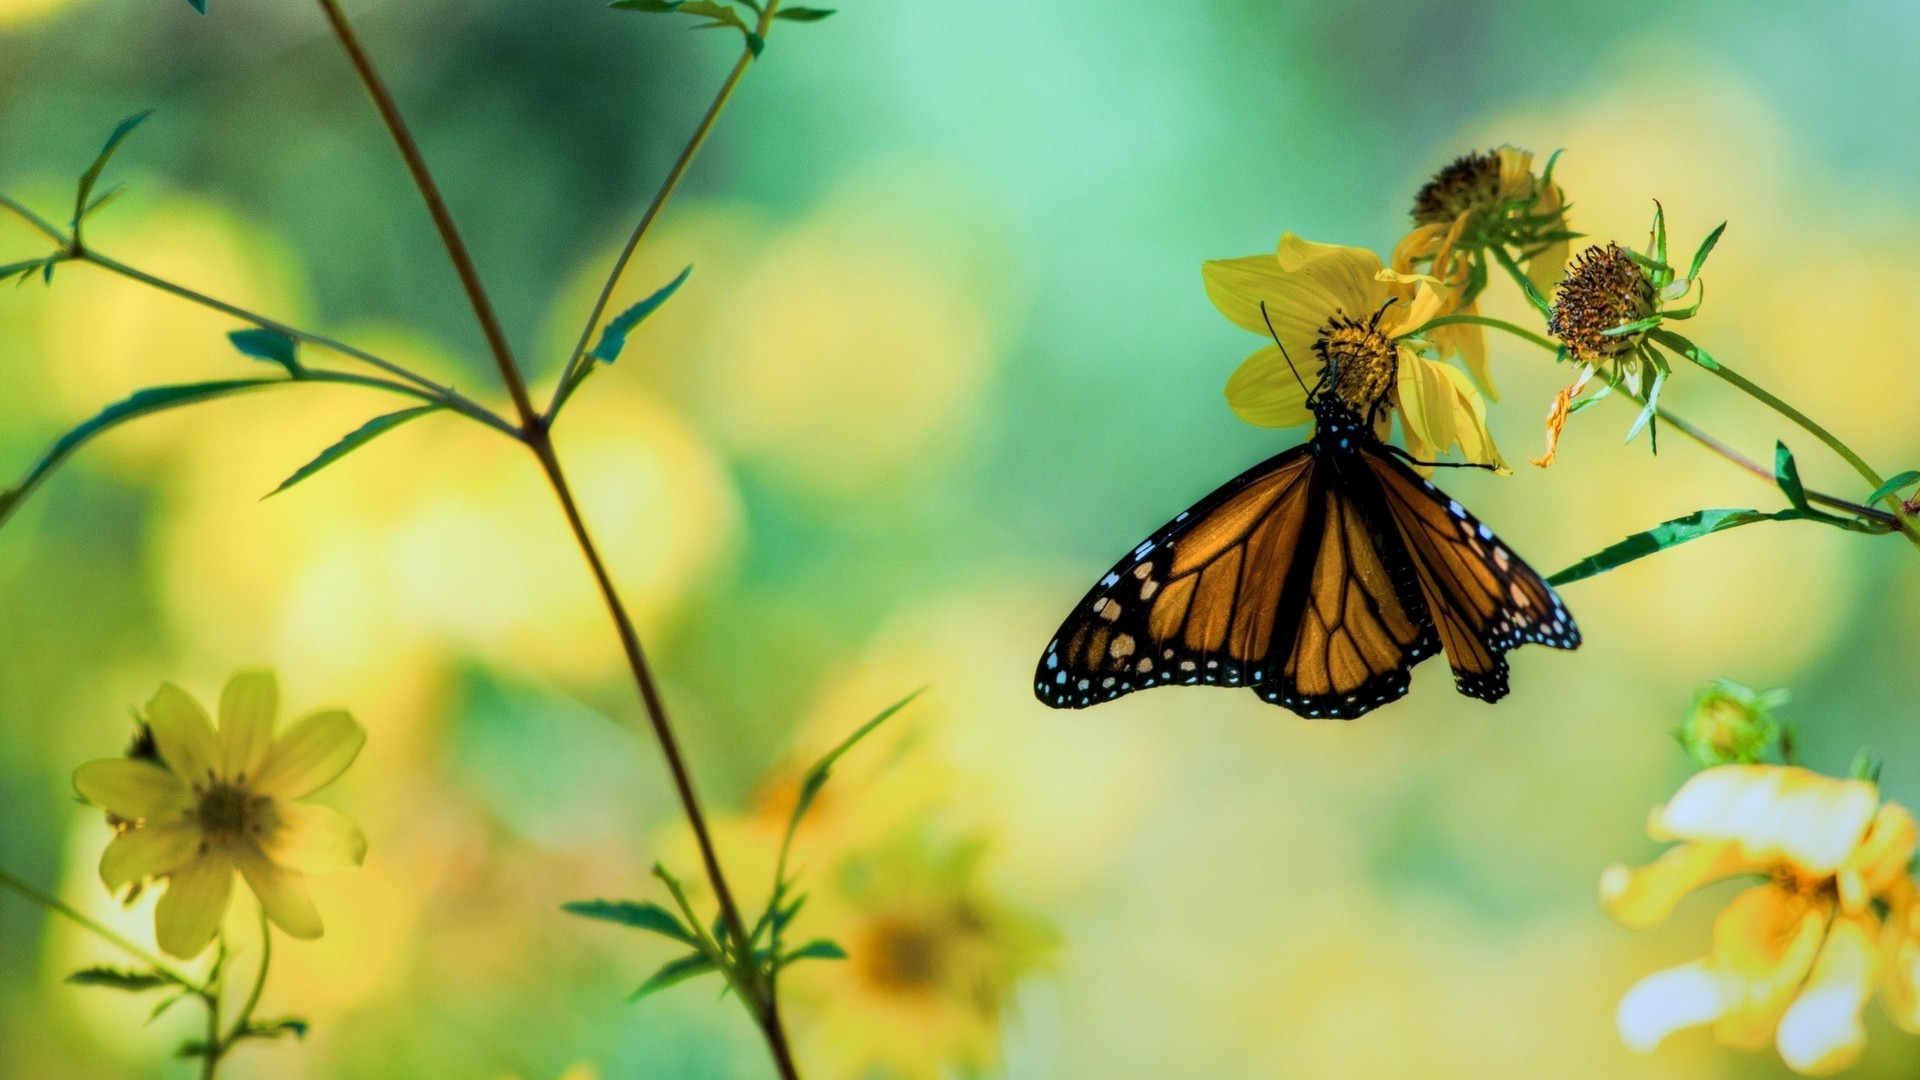 Wallpaper Butterfly Pictures 1920x1080